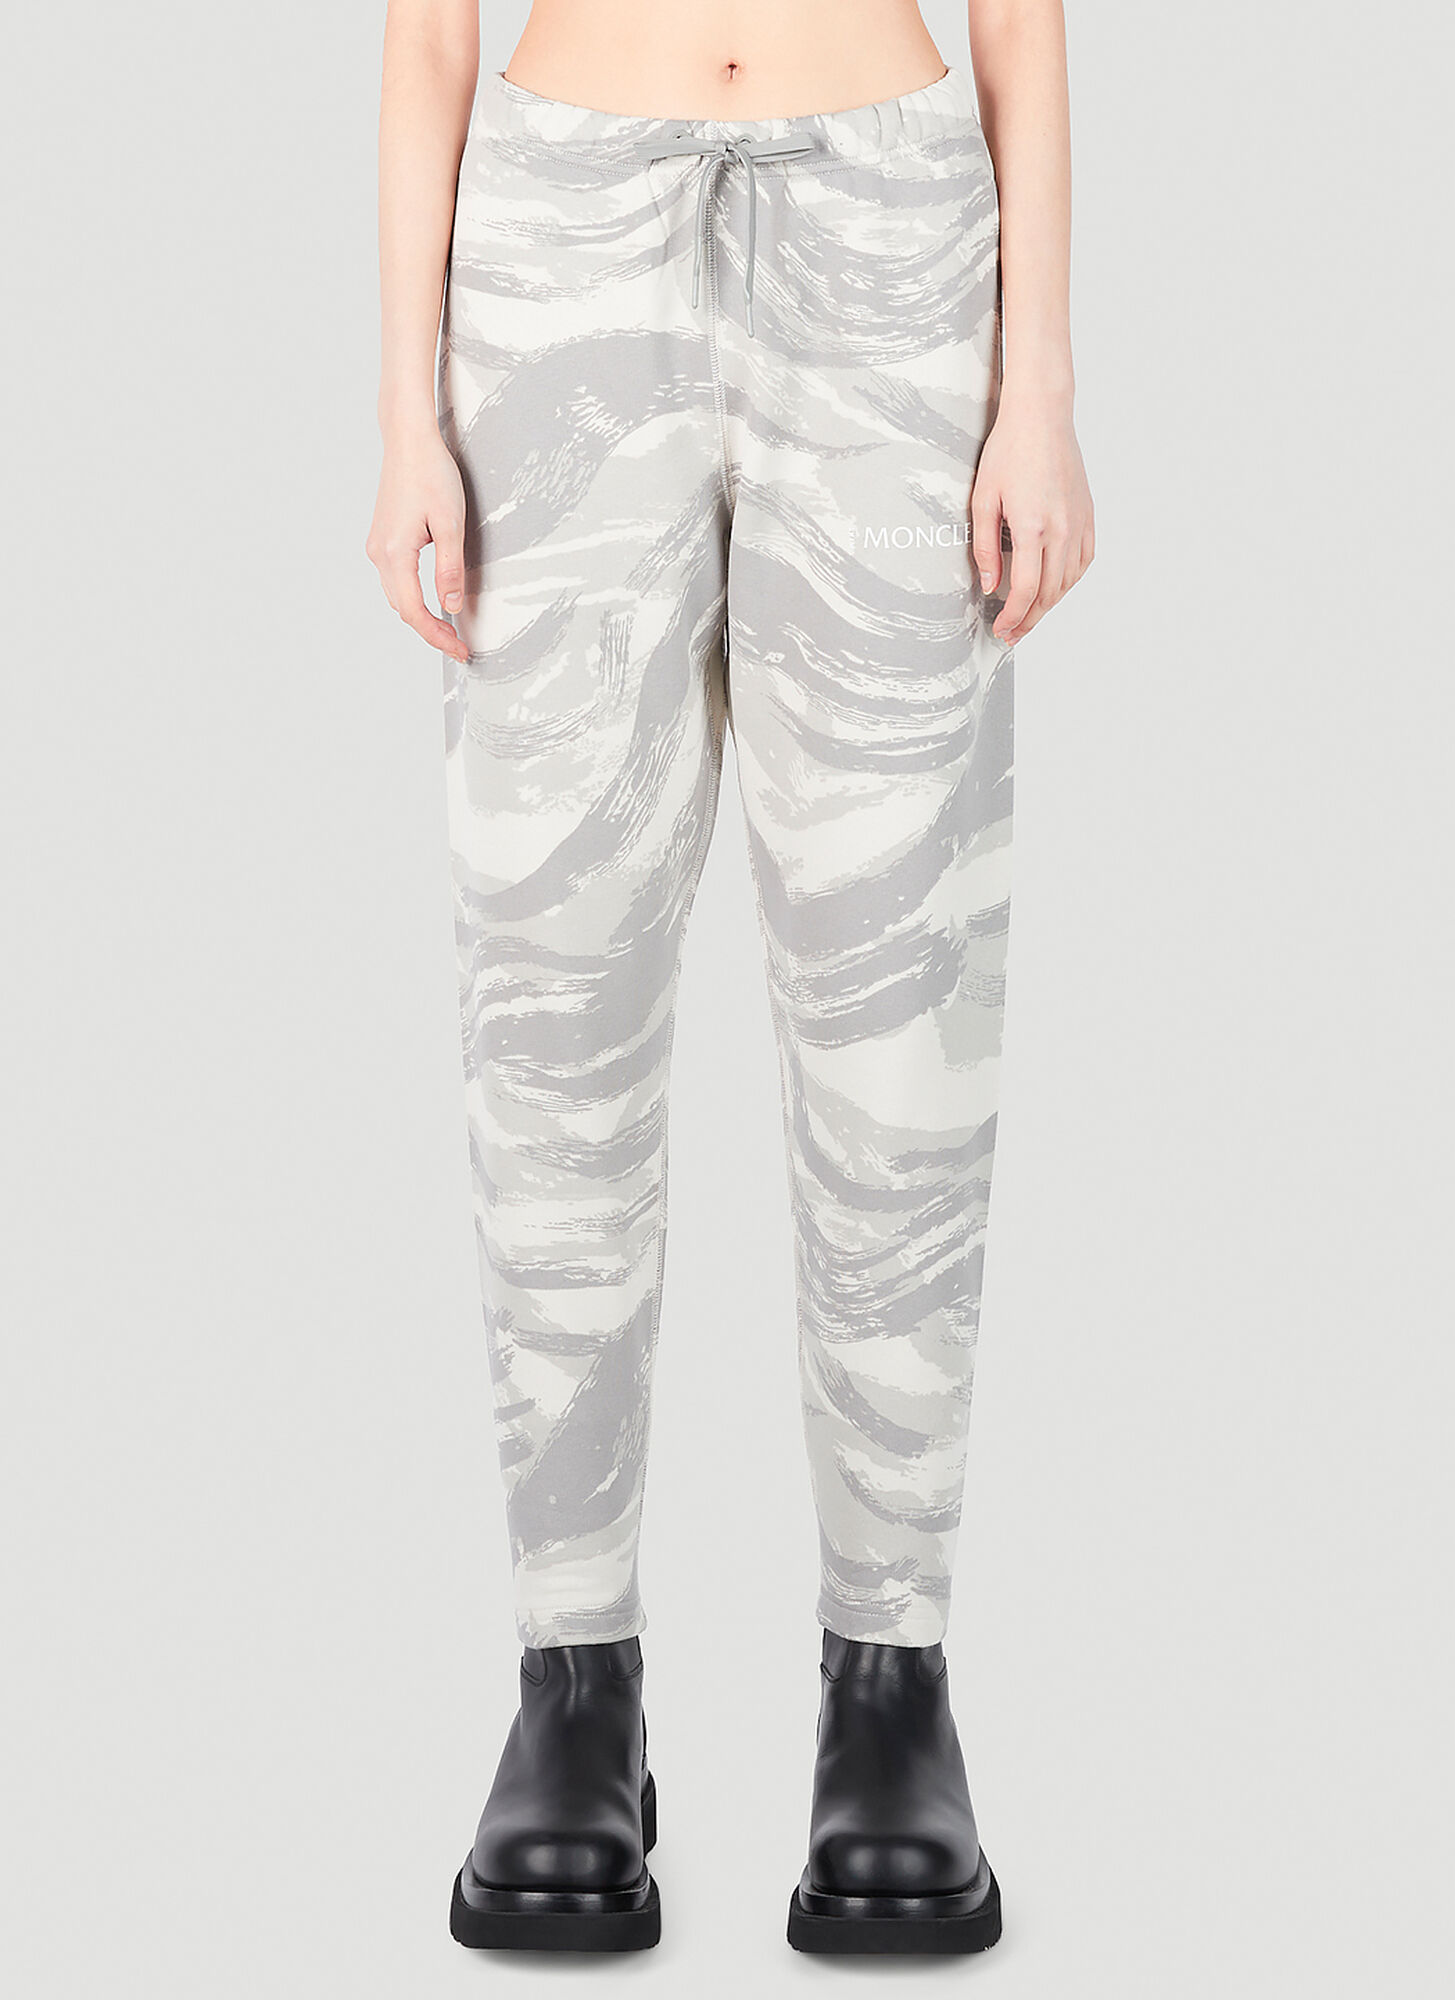 Moncler Genius 4 Moncler Hyke Graphic Tapered Track Pants Female Grey